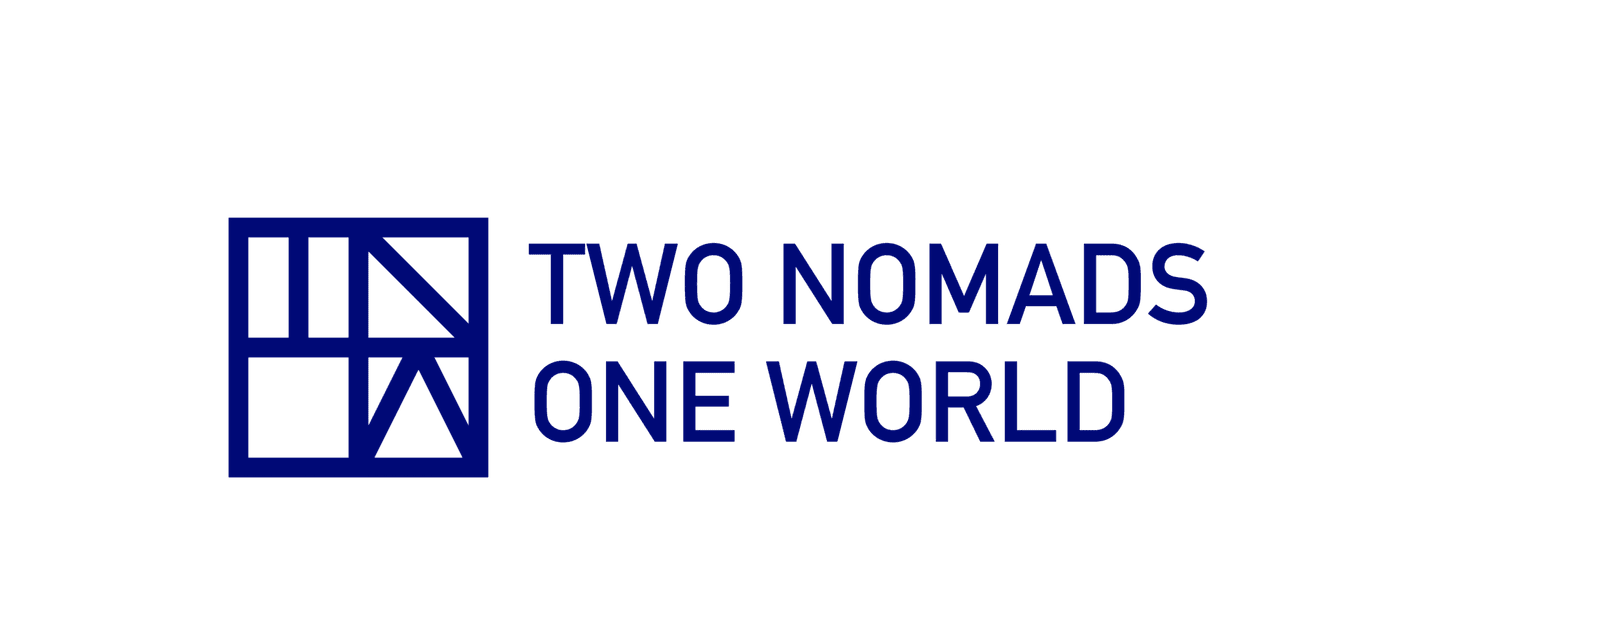 Two Nomads One World | Cyclades | Two Nomads One World